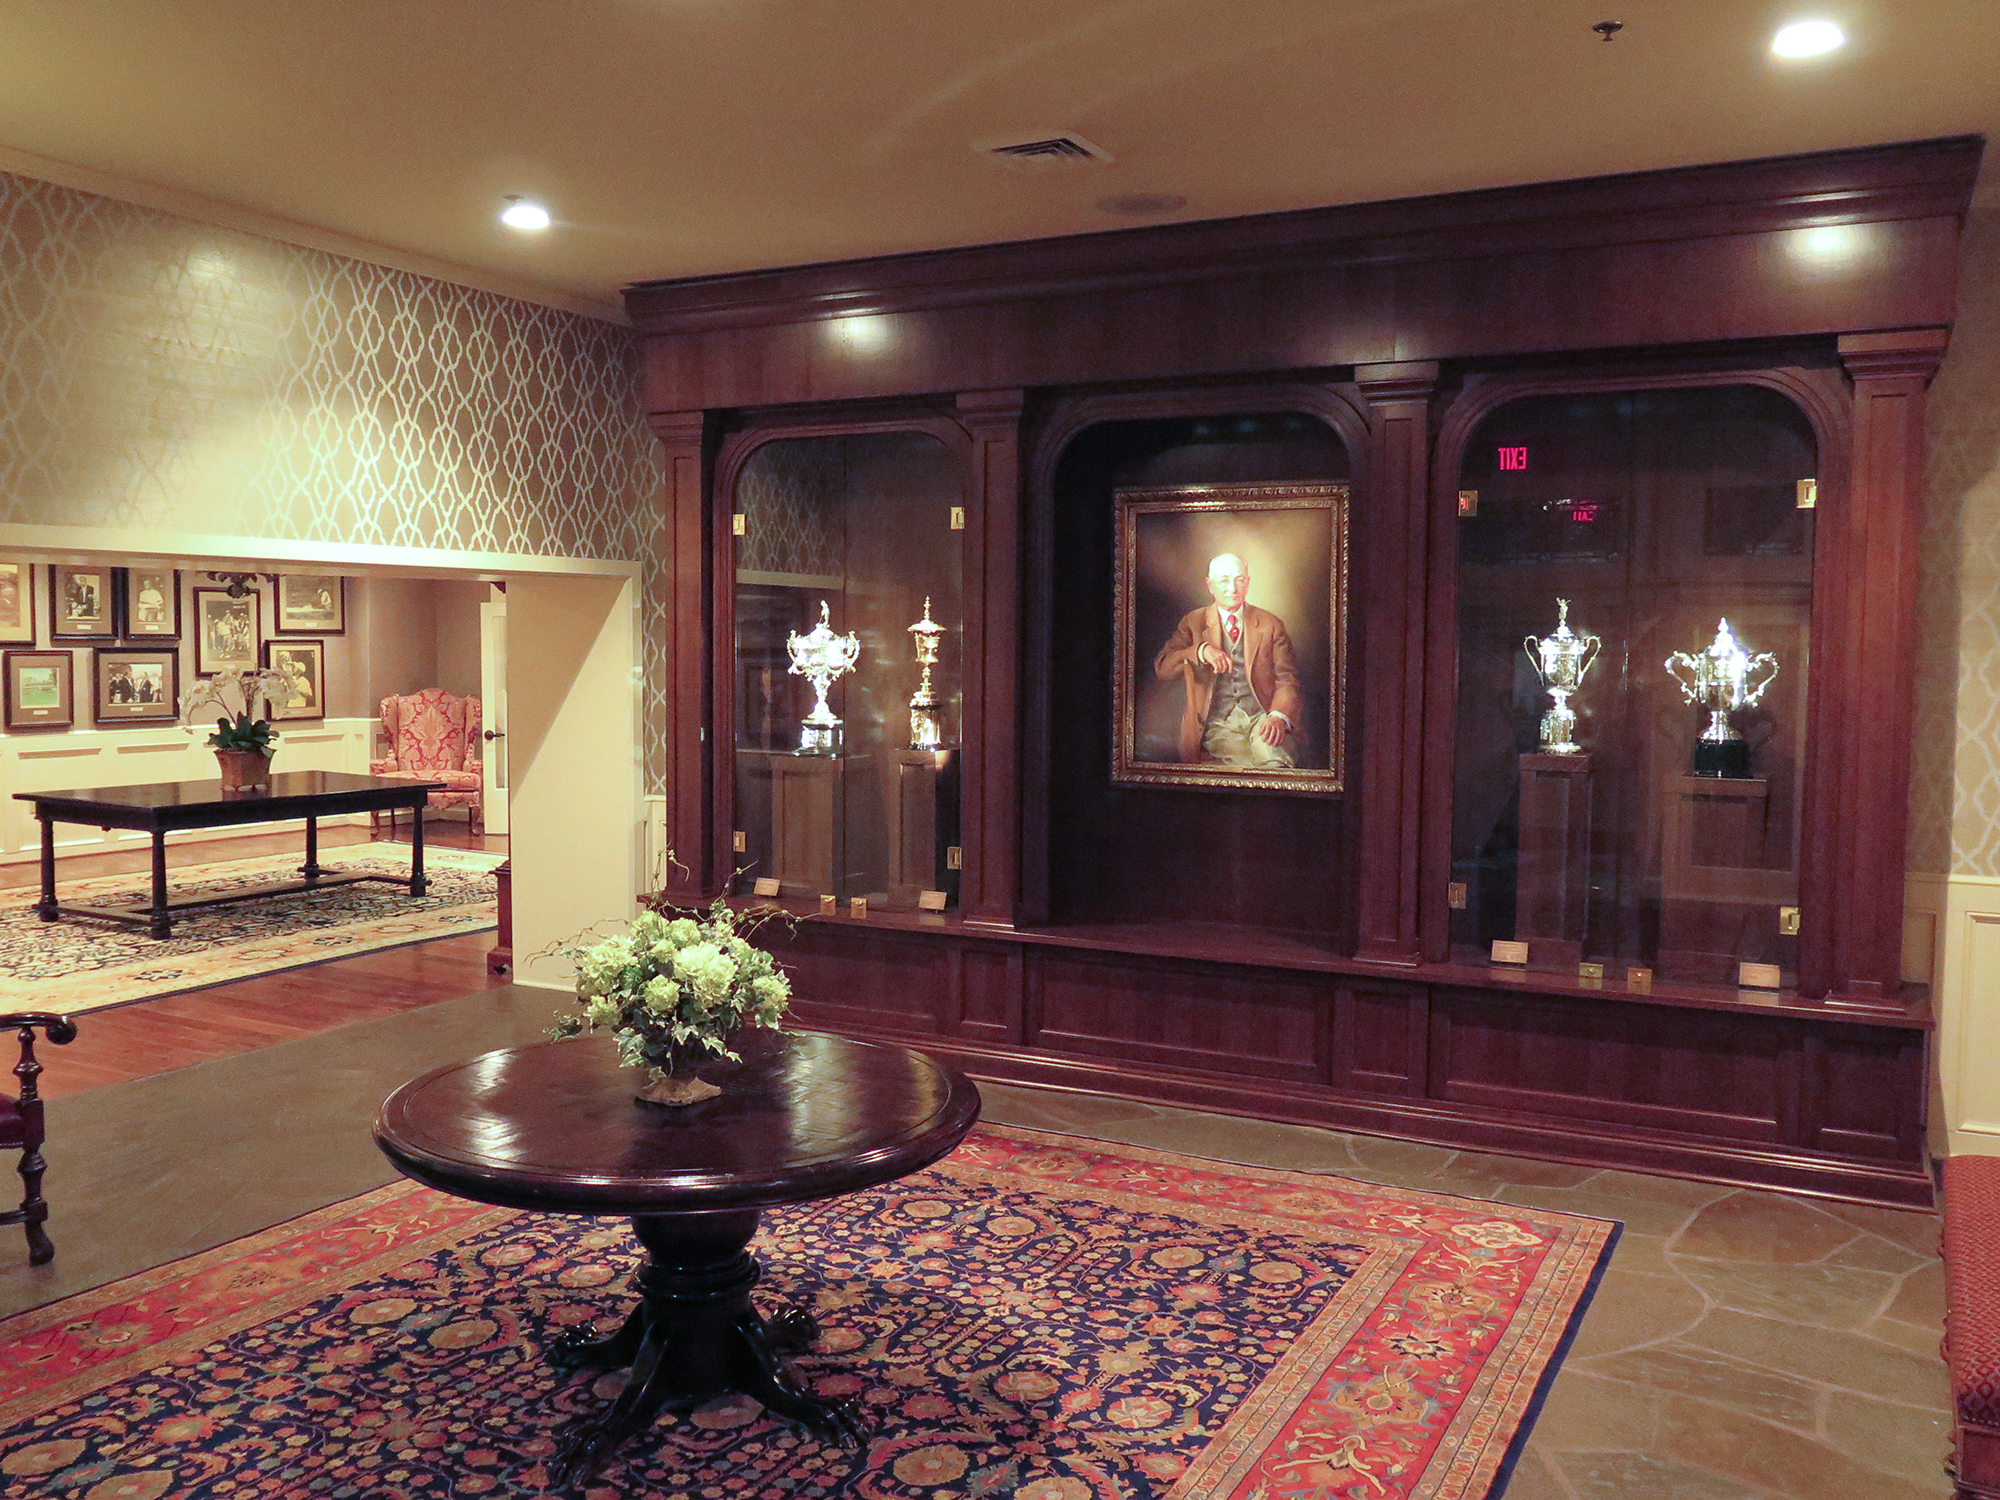 Traditional styled room with round center table, Wooden display cases against back wall with artifacts and spotlighting throughout